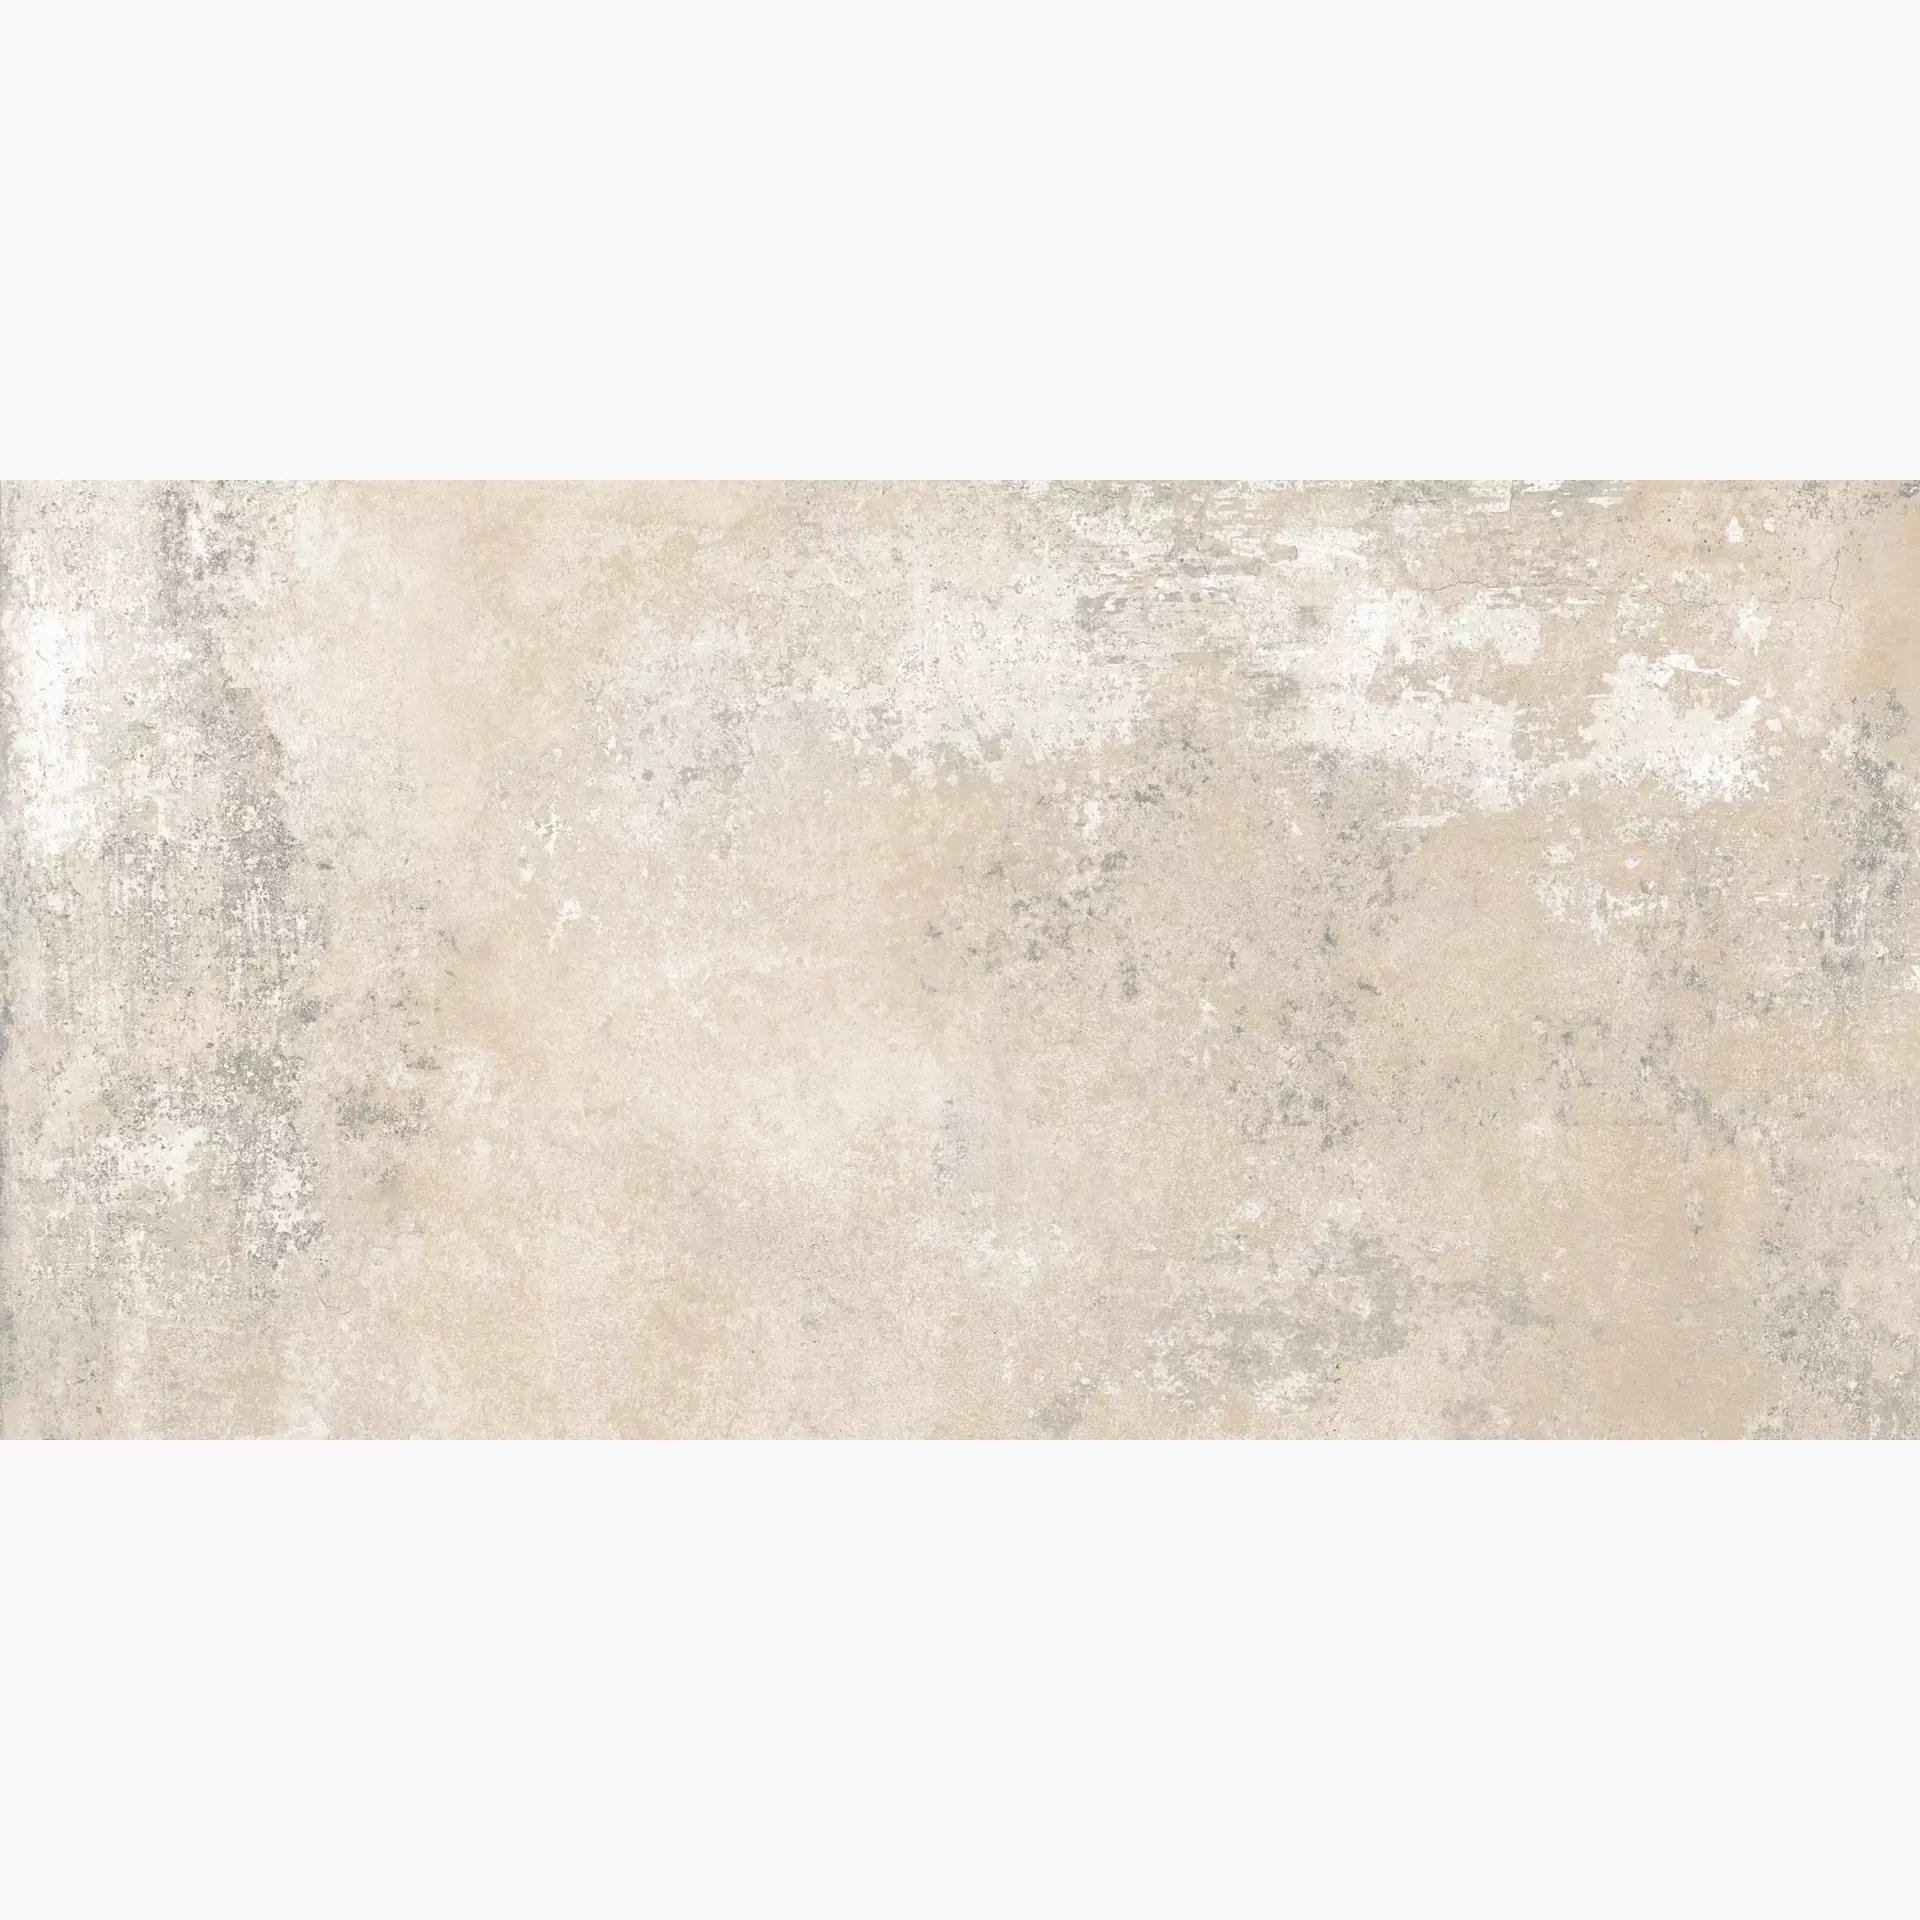 ABK Ghost Clay Naturale PF60005067 60x120cm rectified 8,5mm